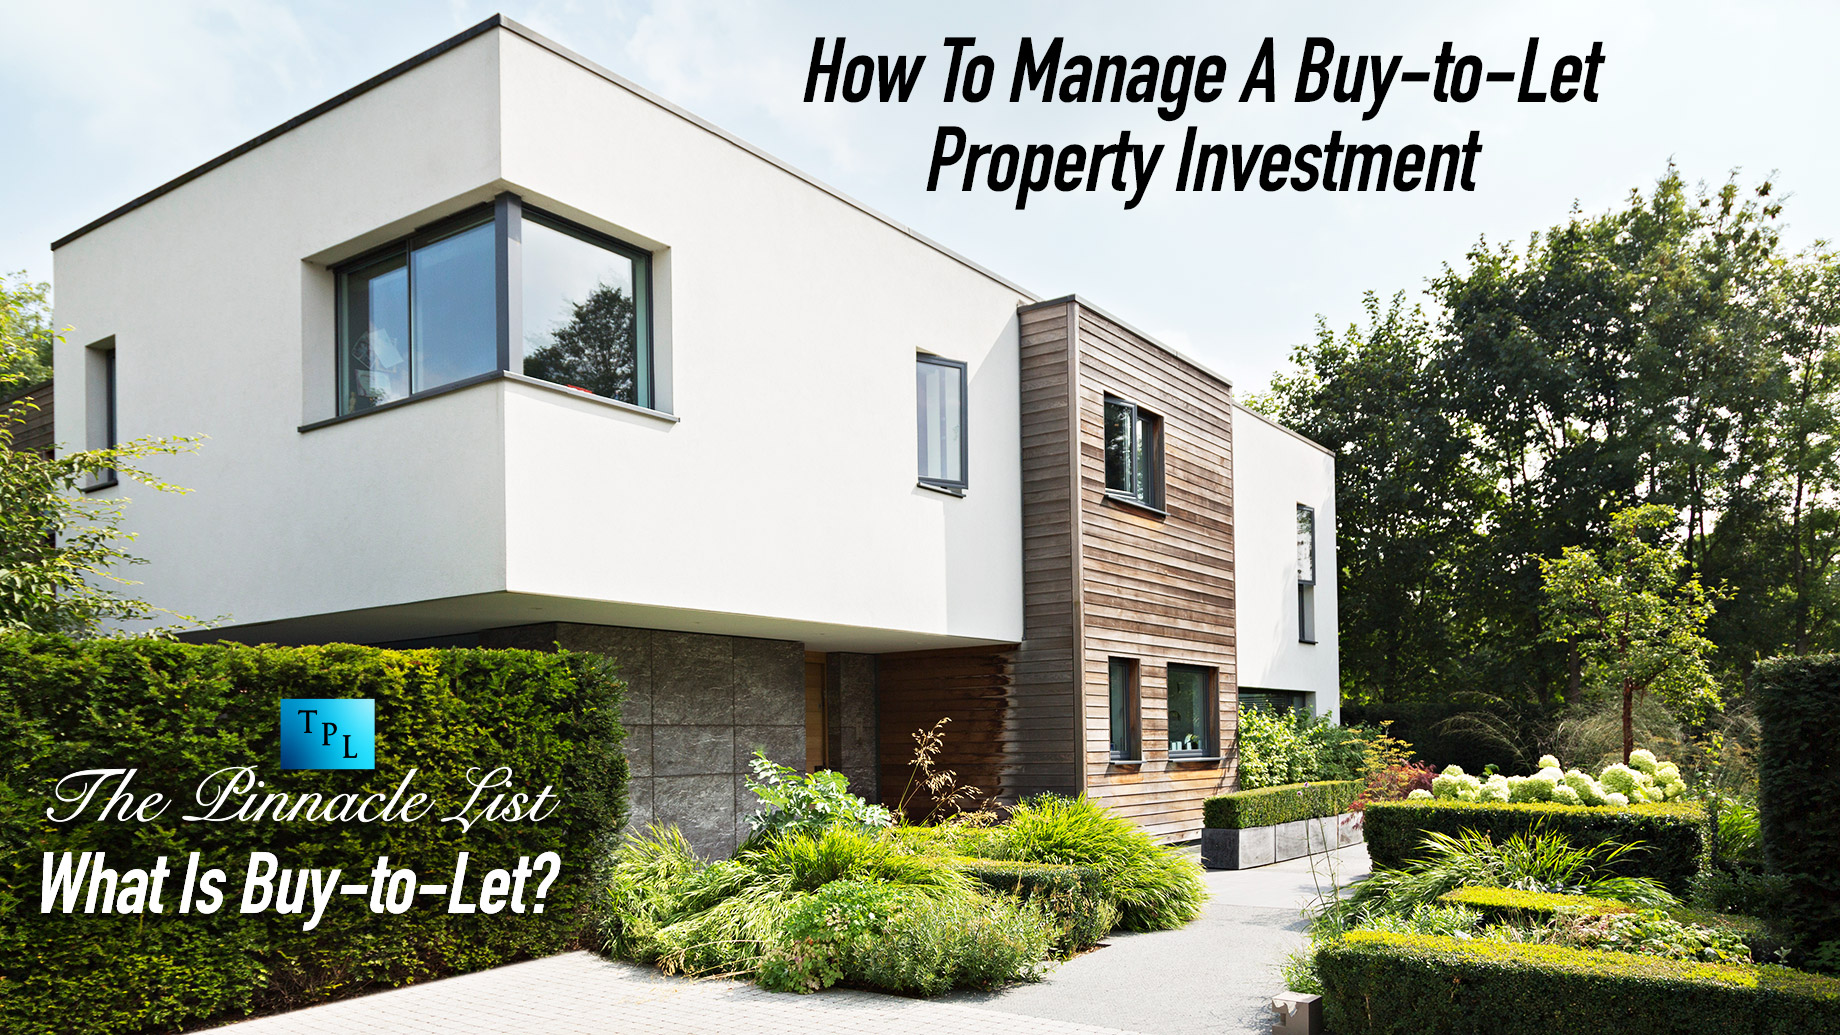 What Is Buy-to-Let? How To Manage A Buy-to-Let Property Investment